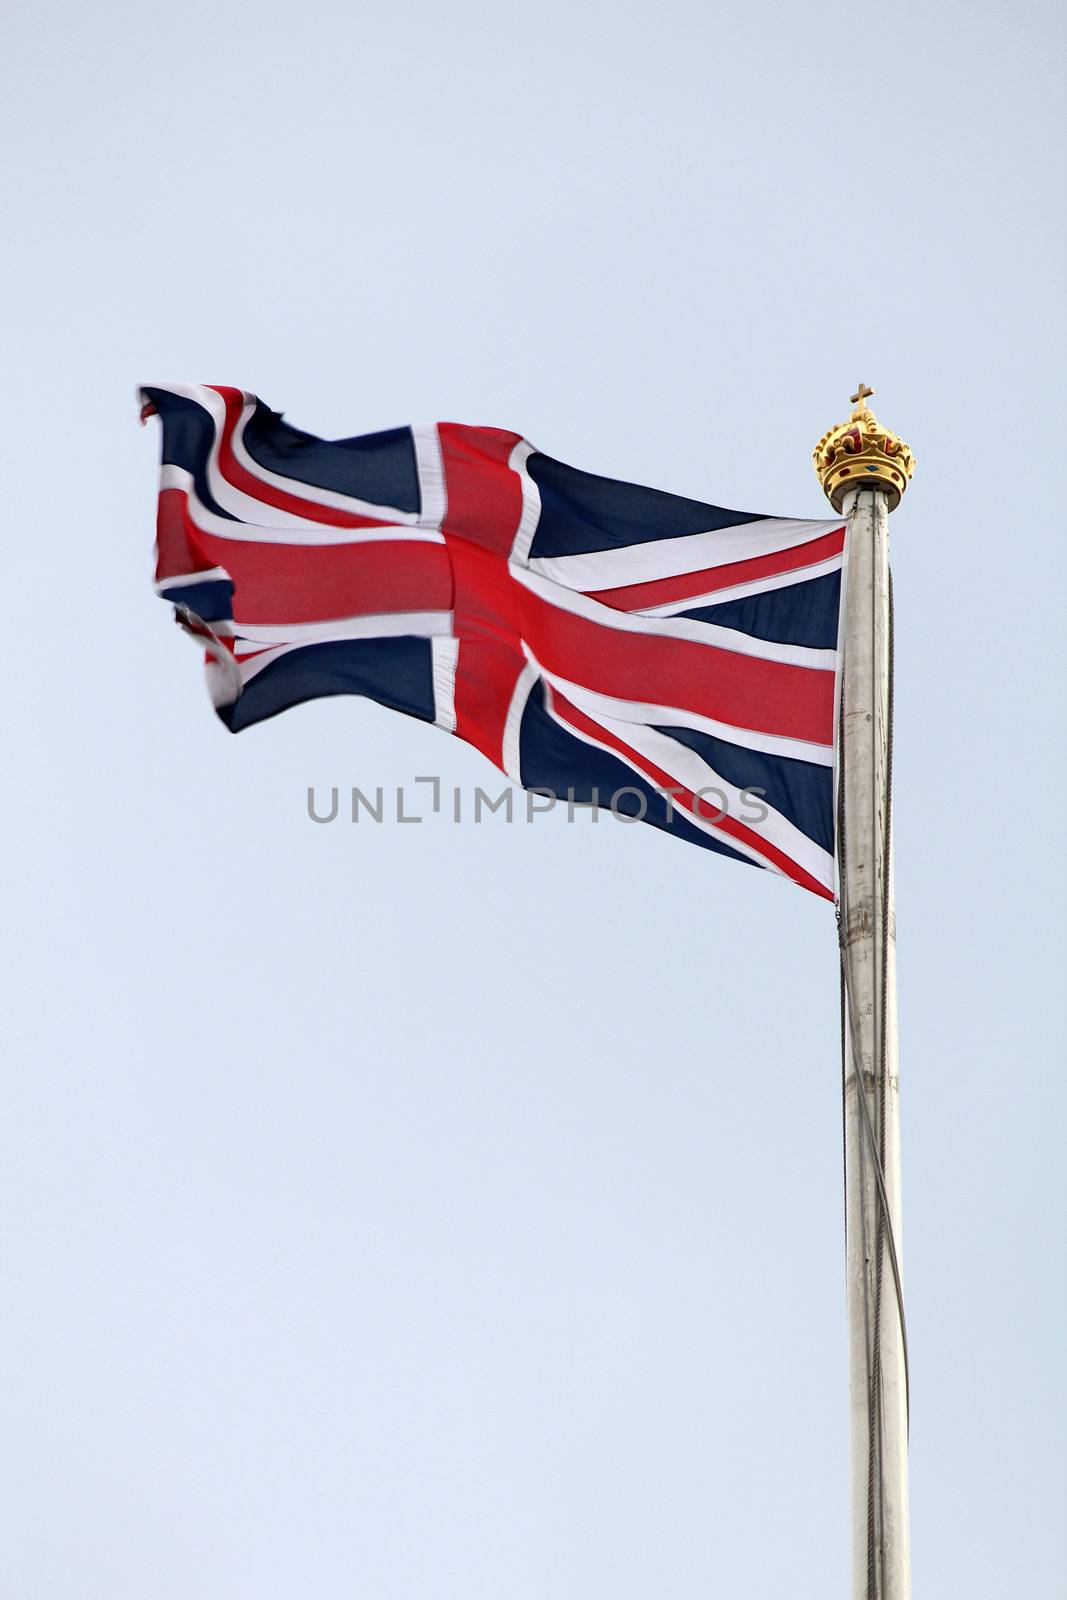 British Flag on top of Bukingham Palace, with gold crown